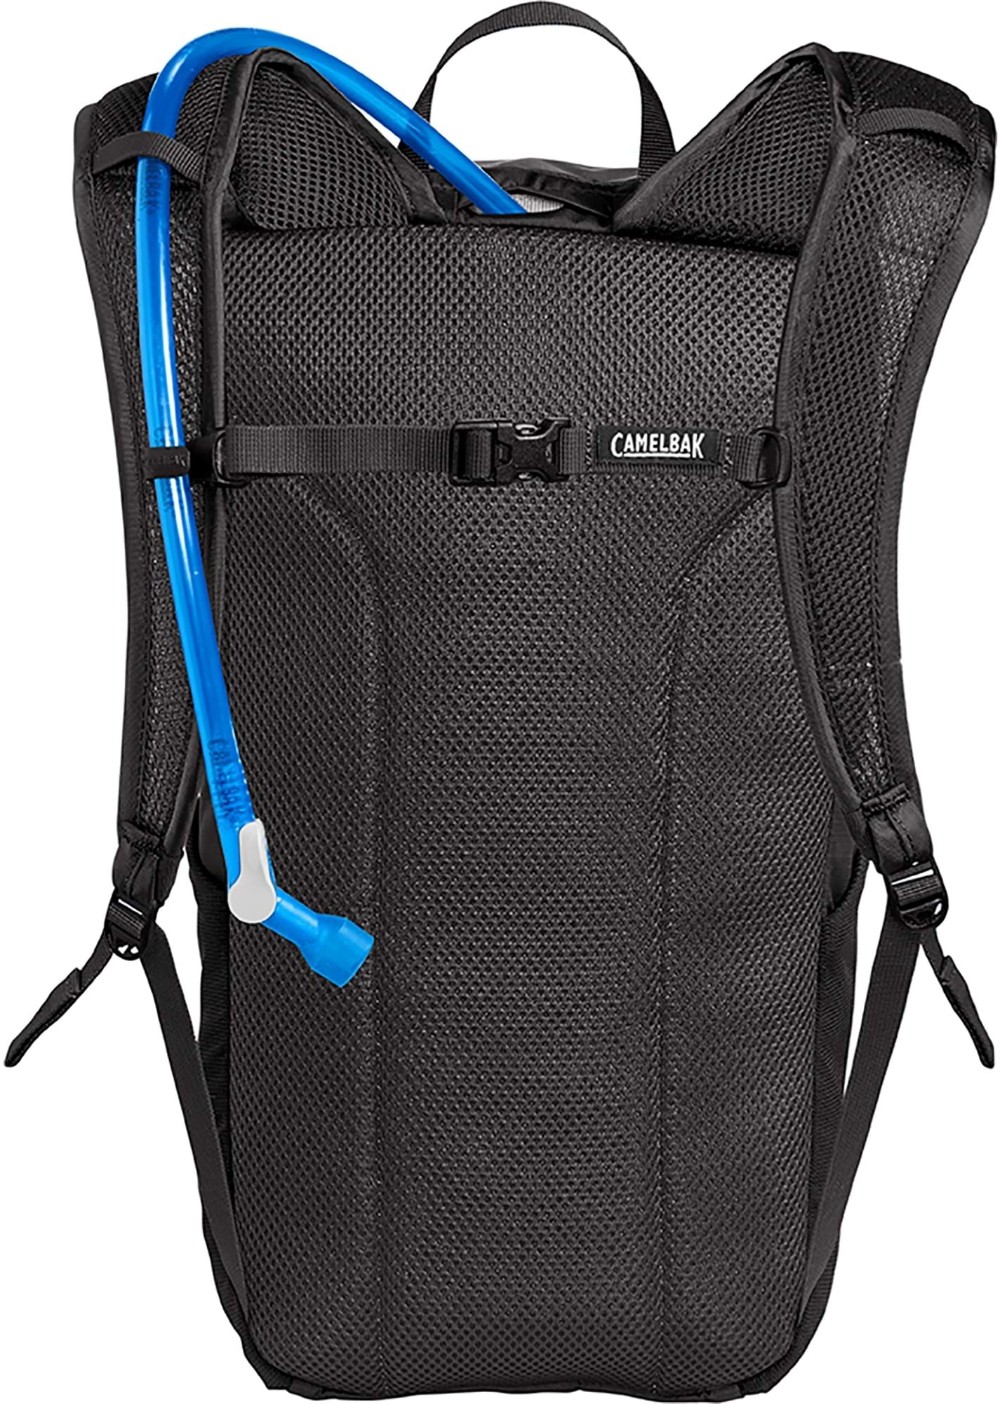 Arete Hydration Pack 18 With 1.5L Reservoir image 2